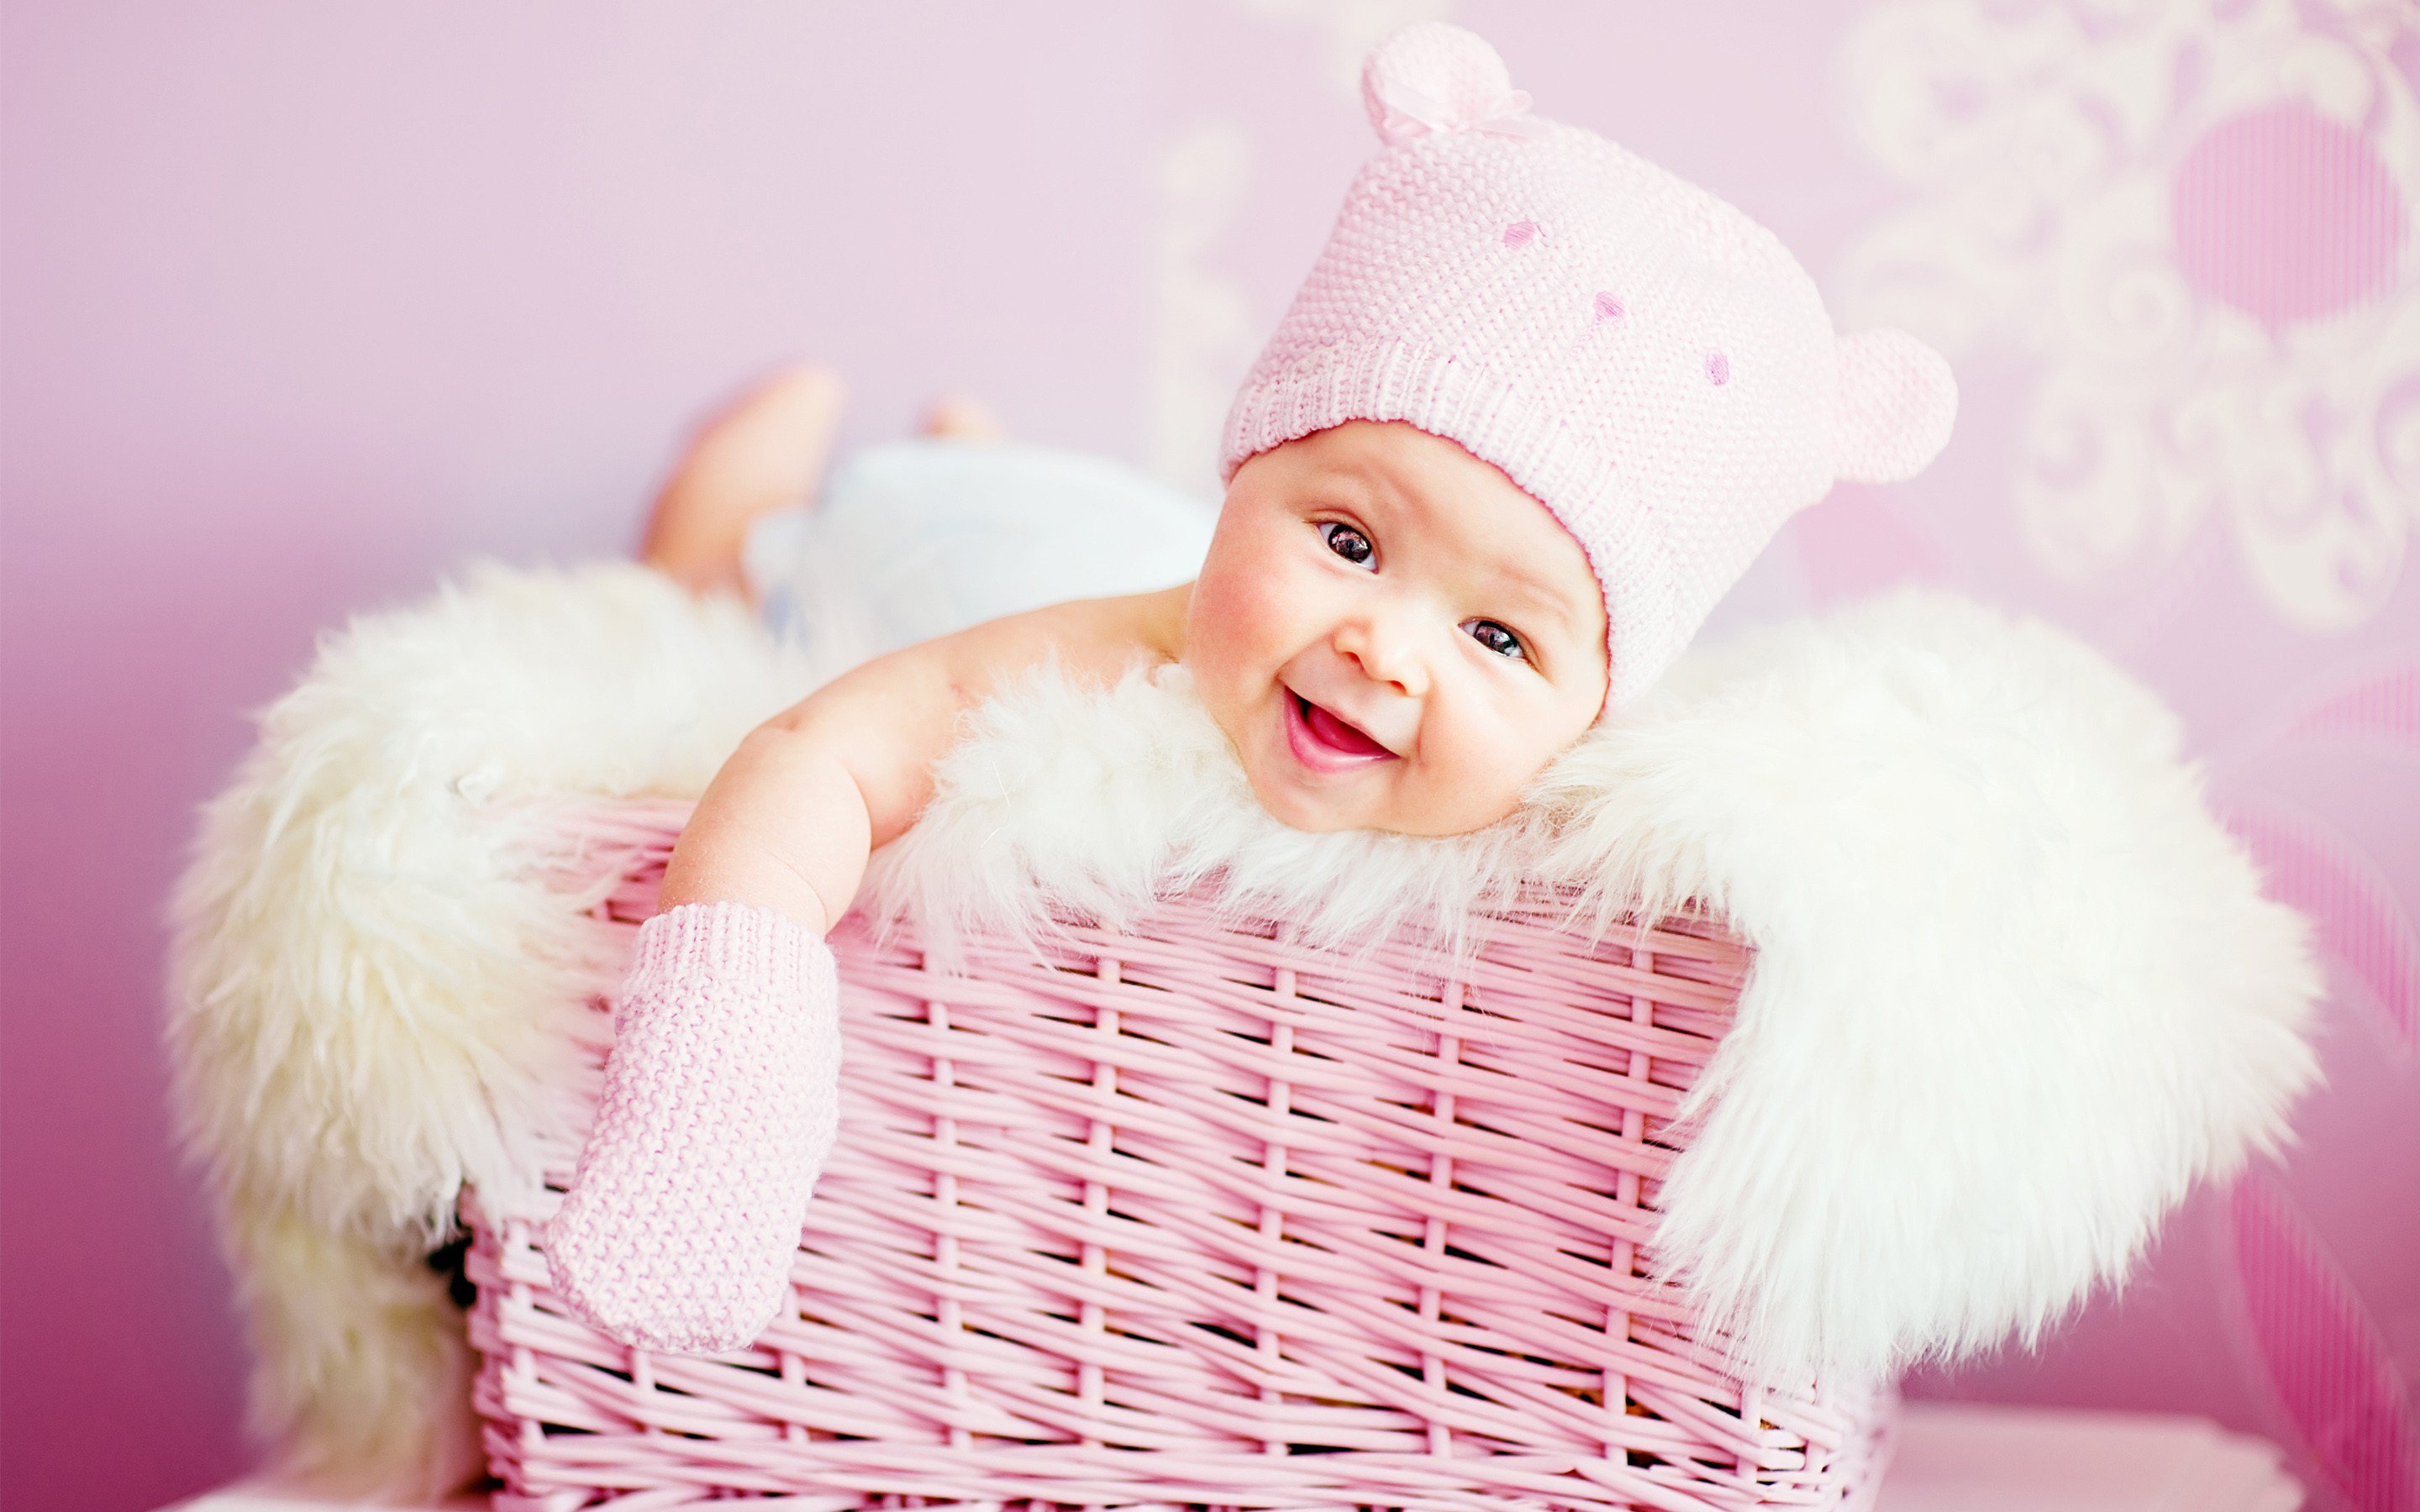 Baby Laughing Cute Wallpaper | HD Wallpapers